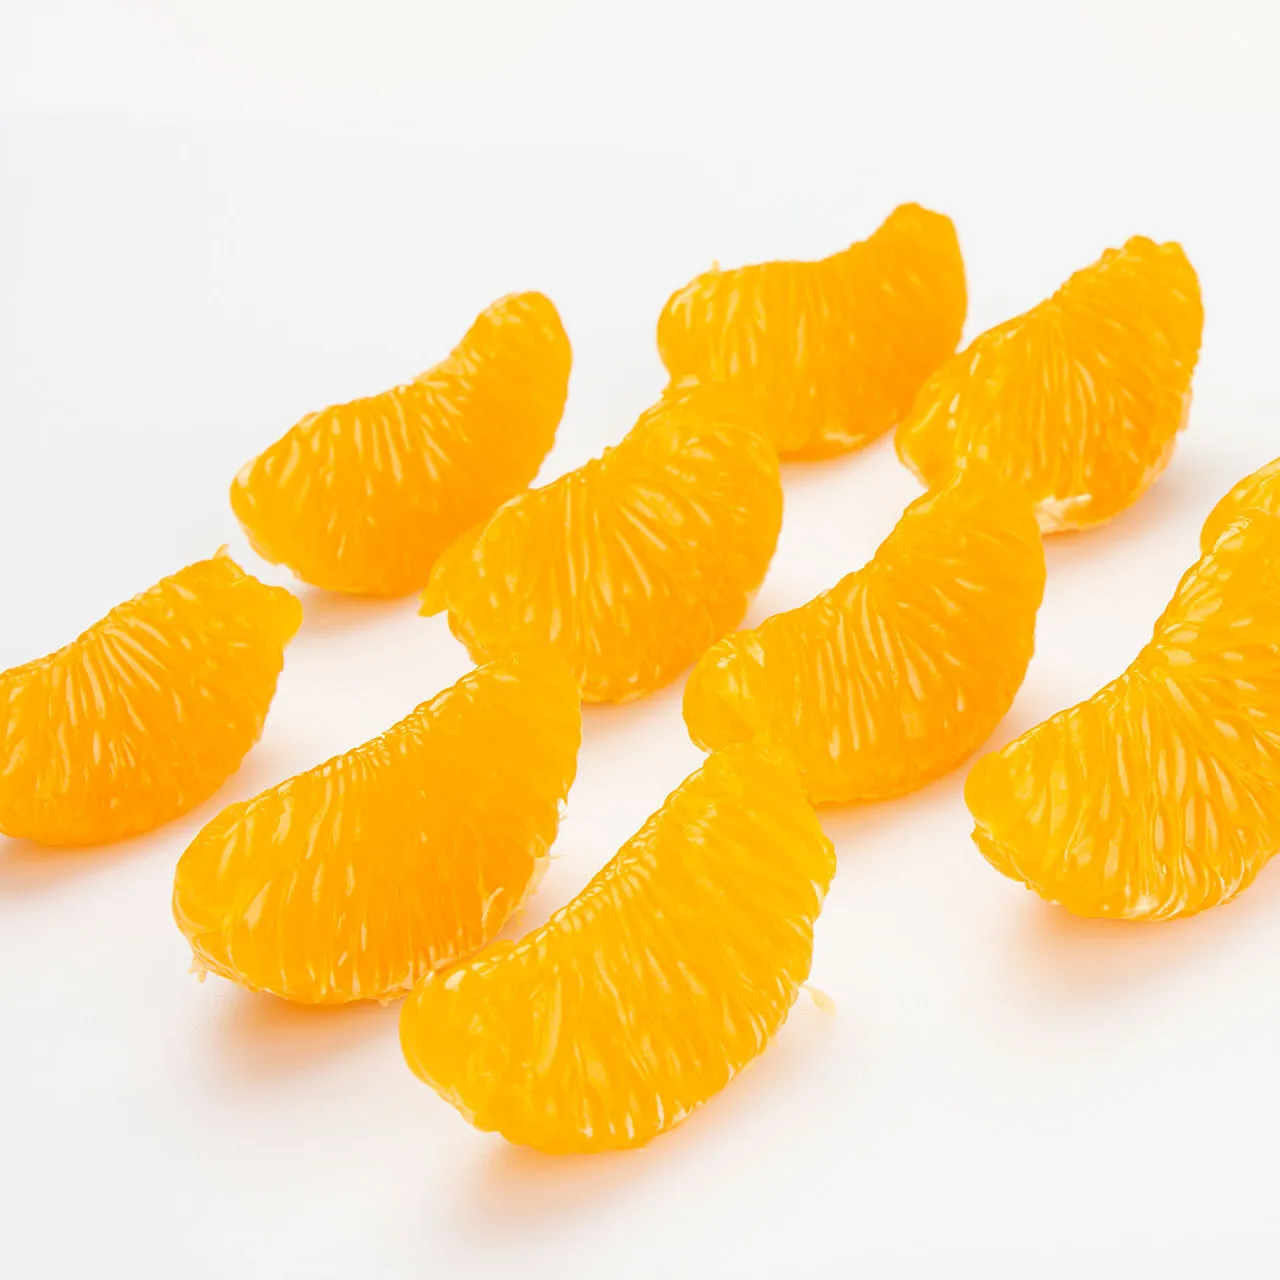 tangerine fruit vs clementine price + wholesale and cheap packing specifications